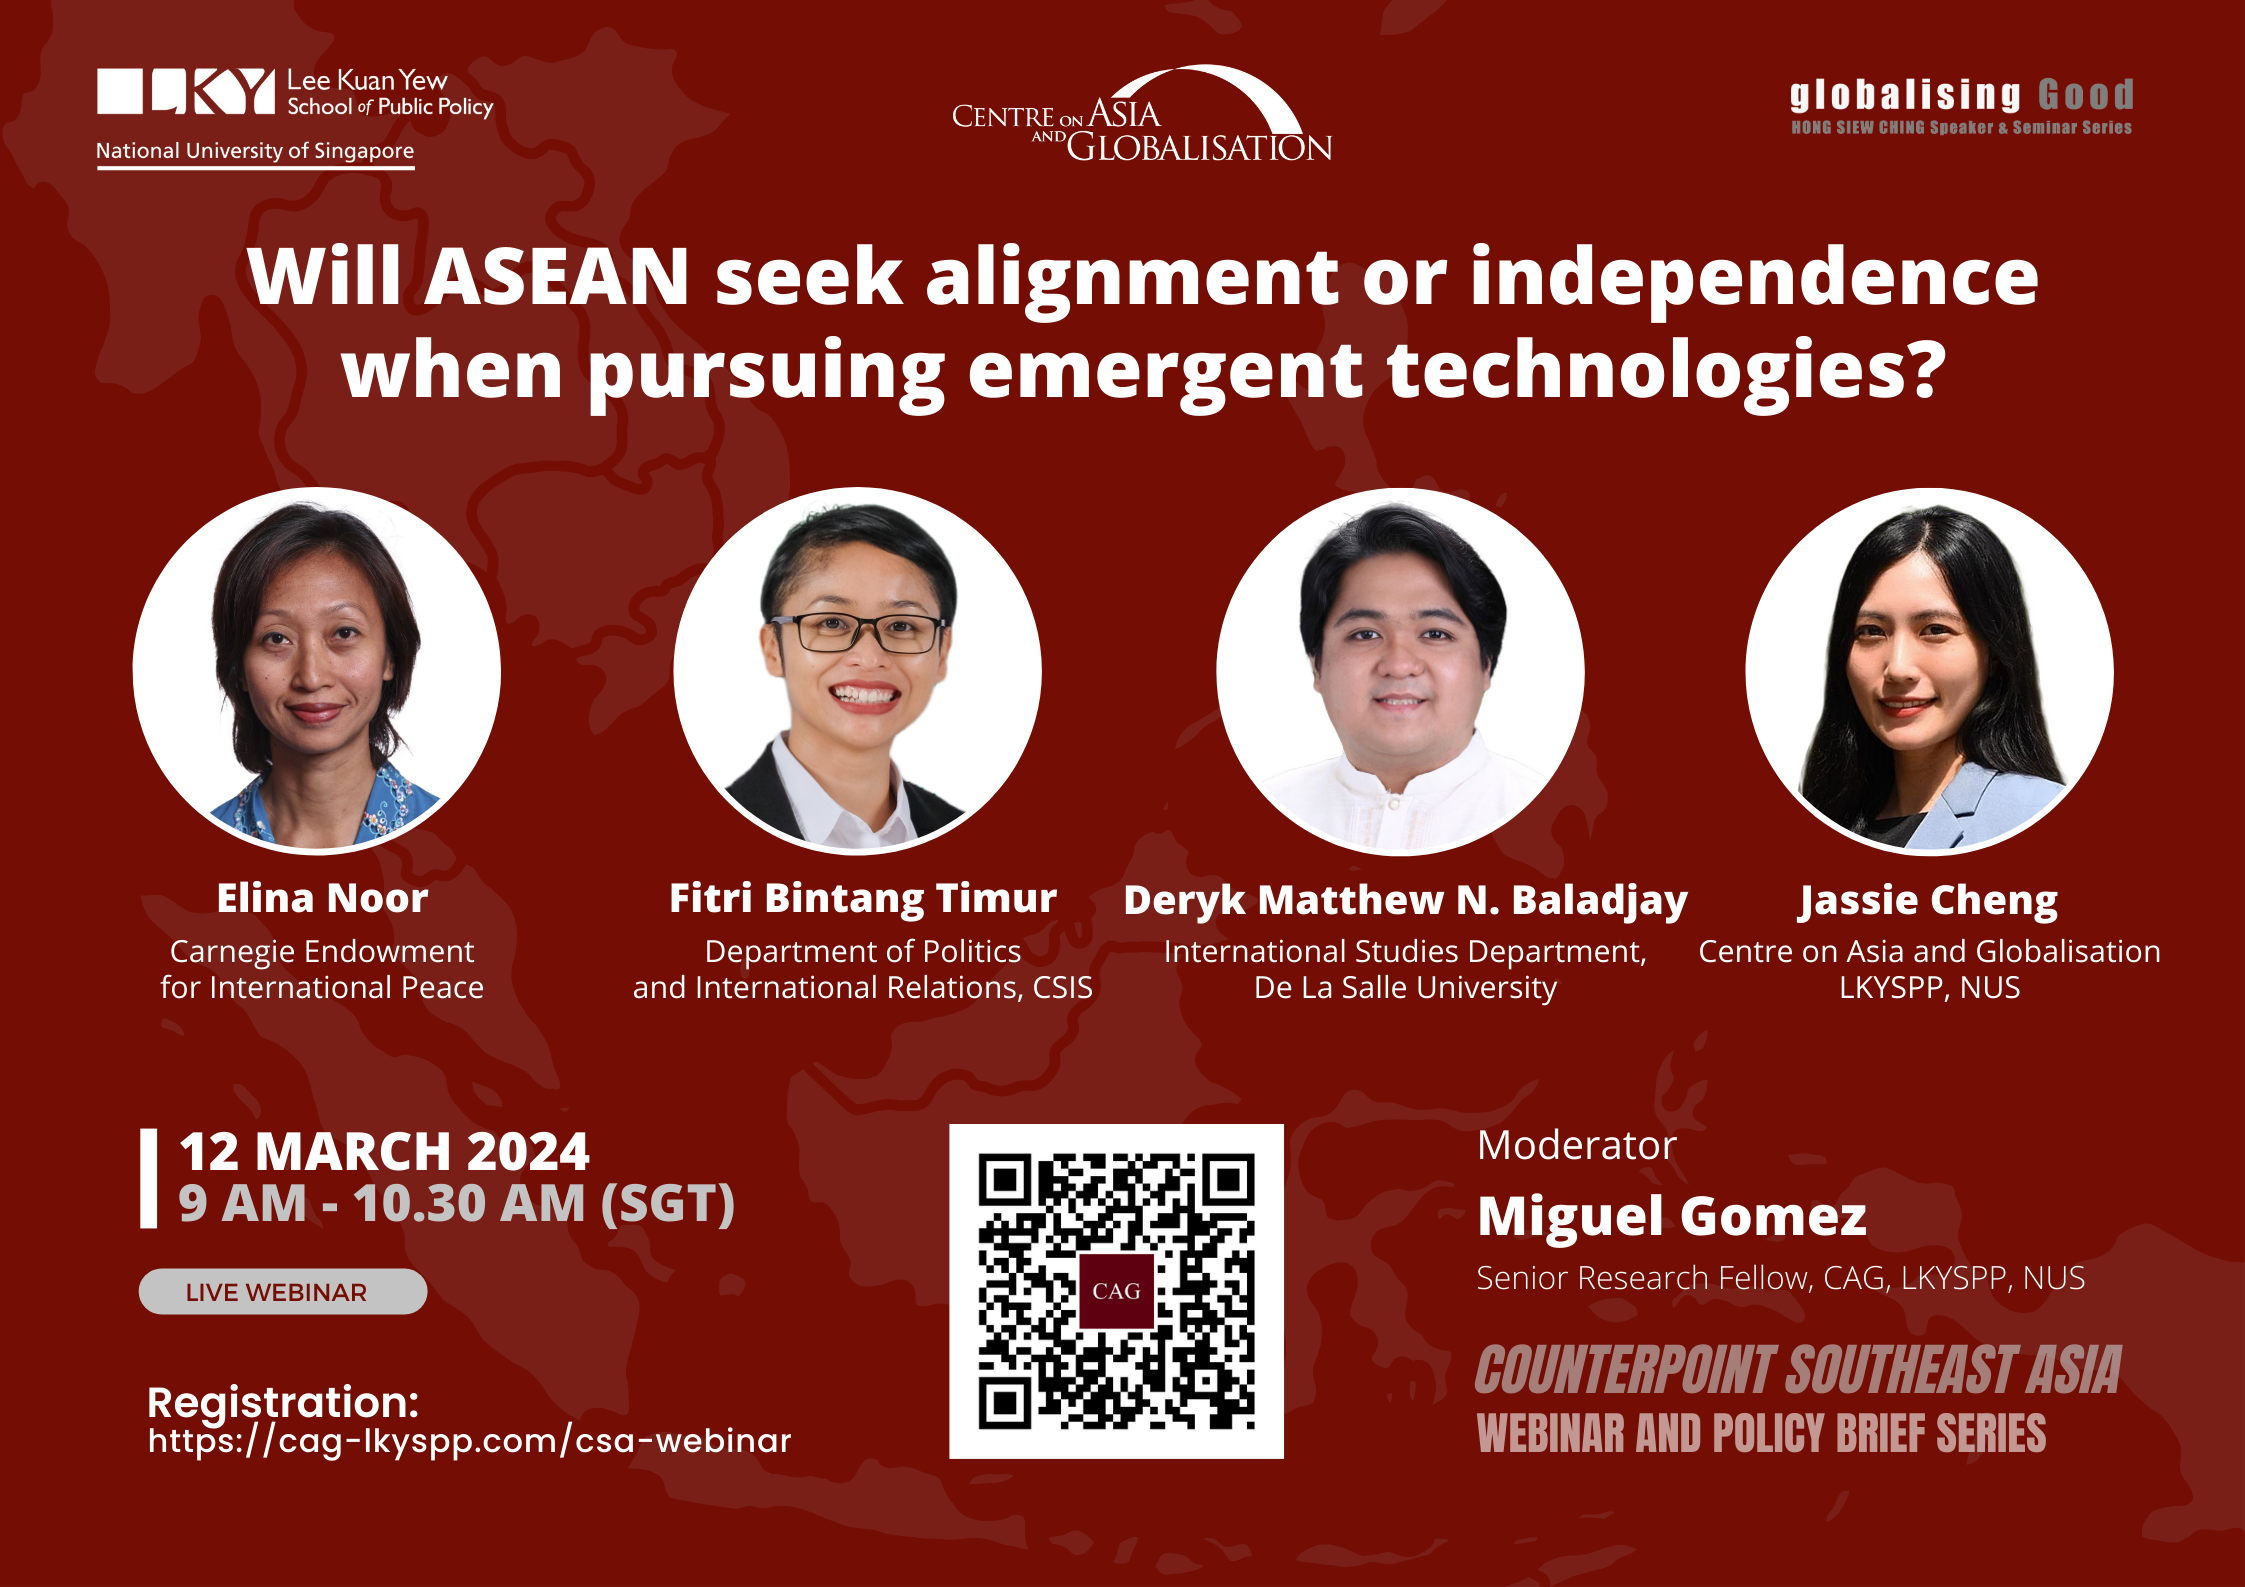 Will ASEAN seek alignment or independence when pursuing emergent technologies?